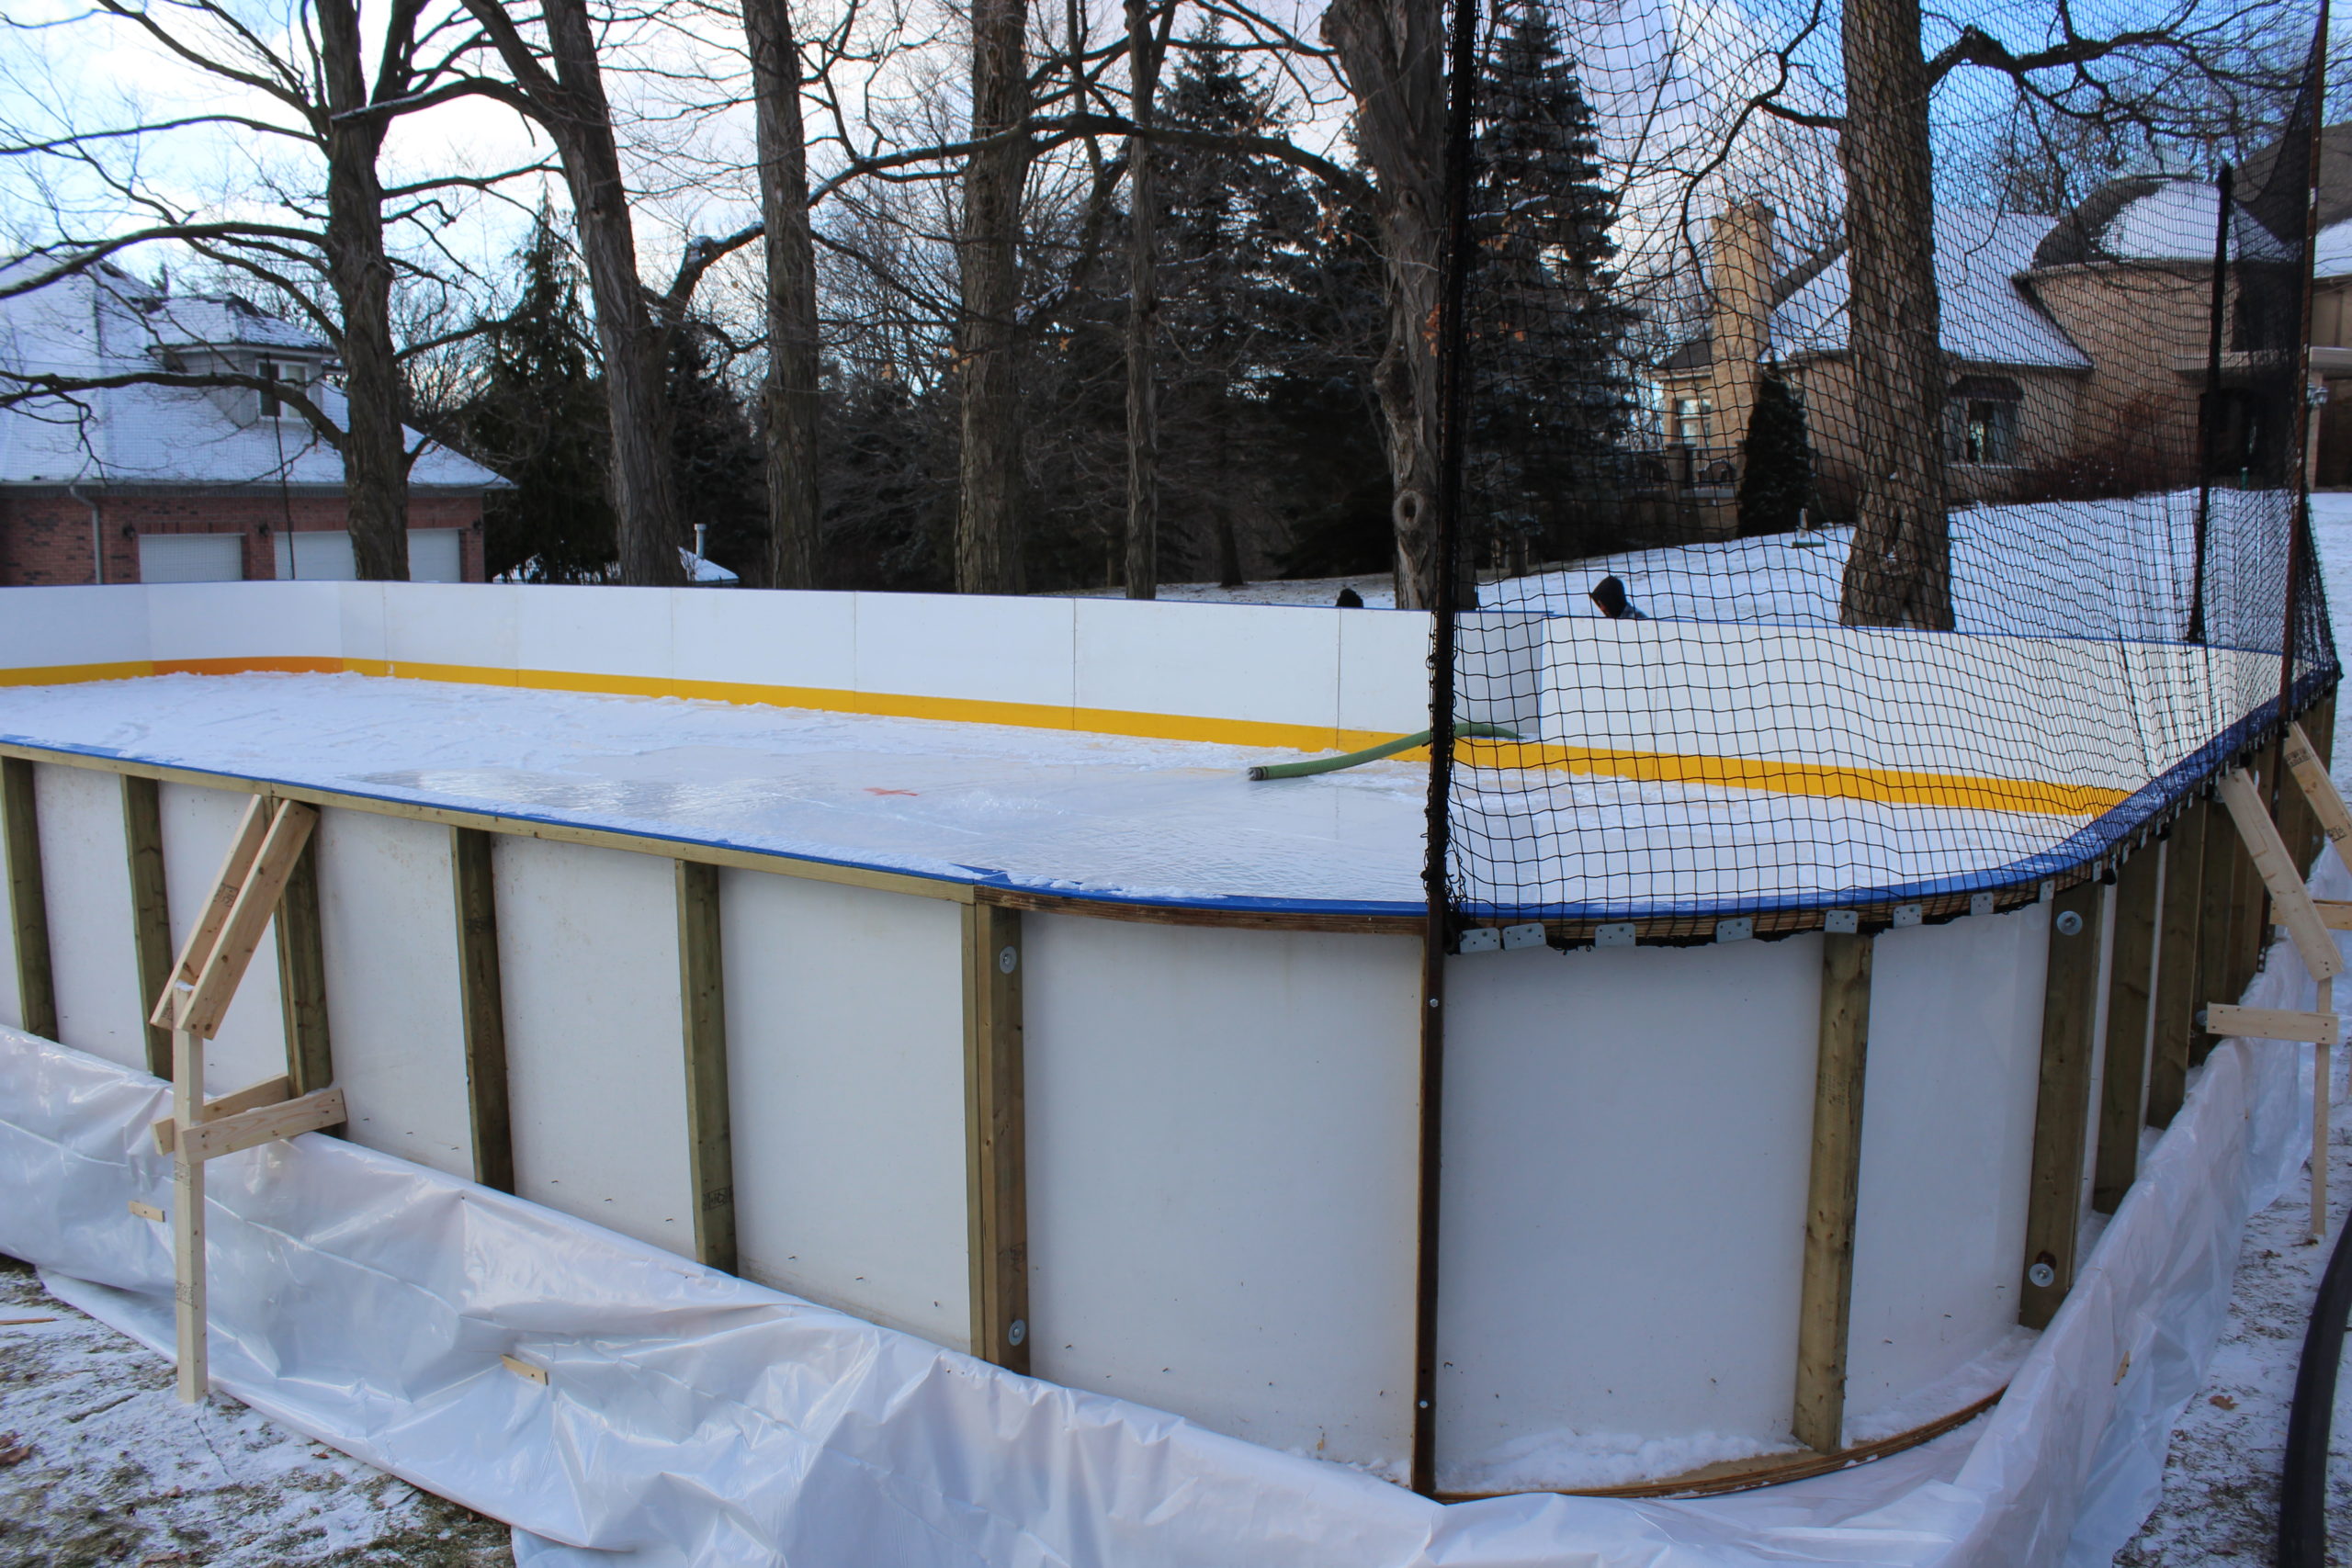 Portable ice rink with subfloor and dasher boards